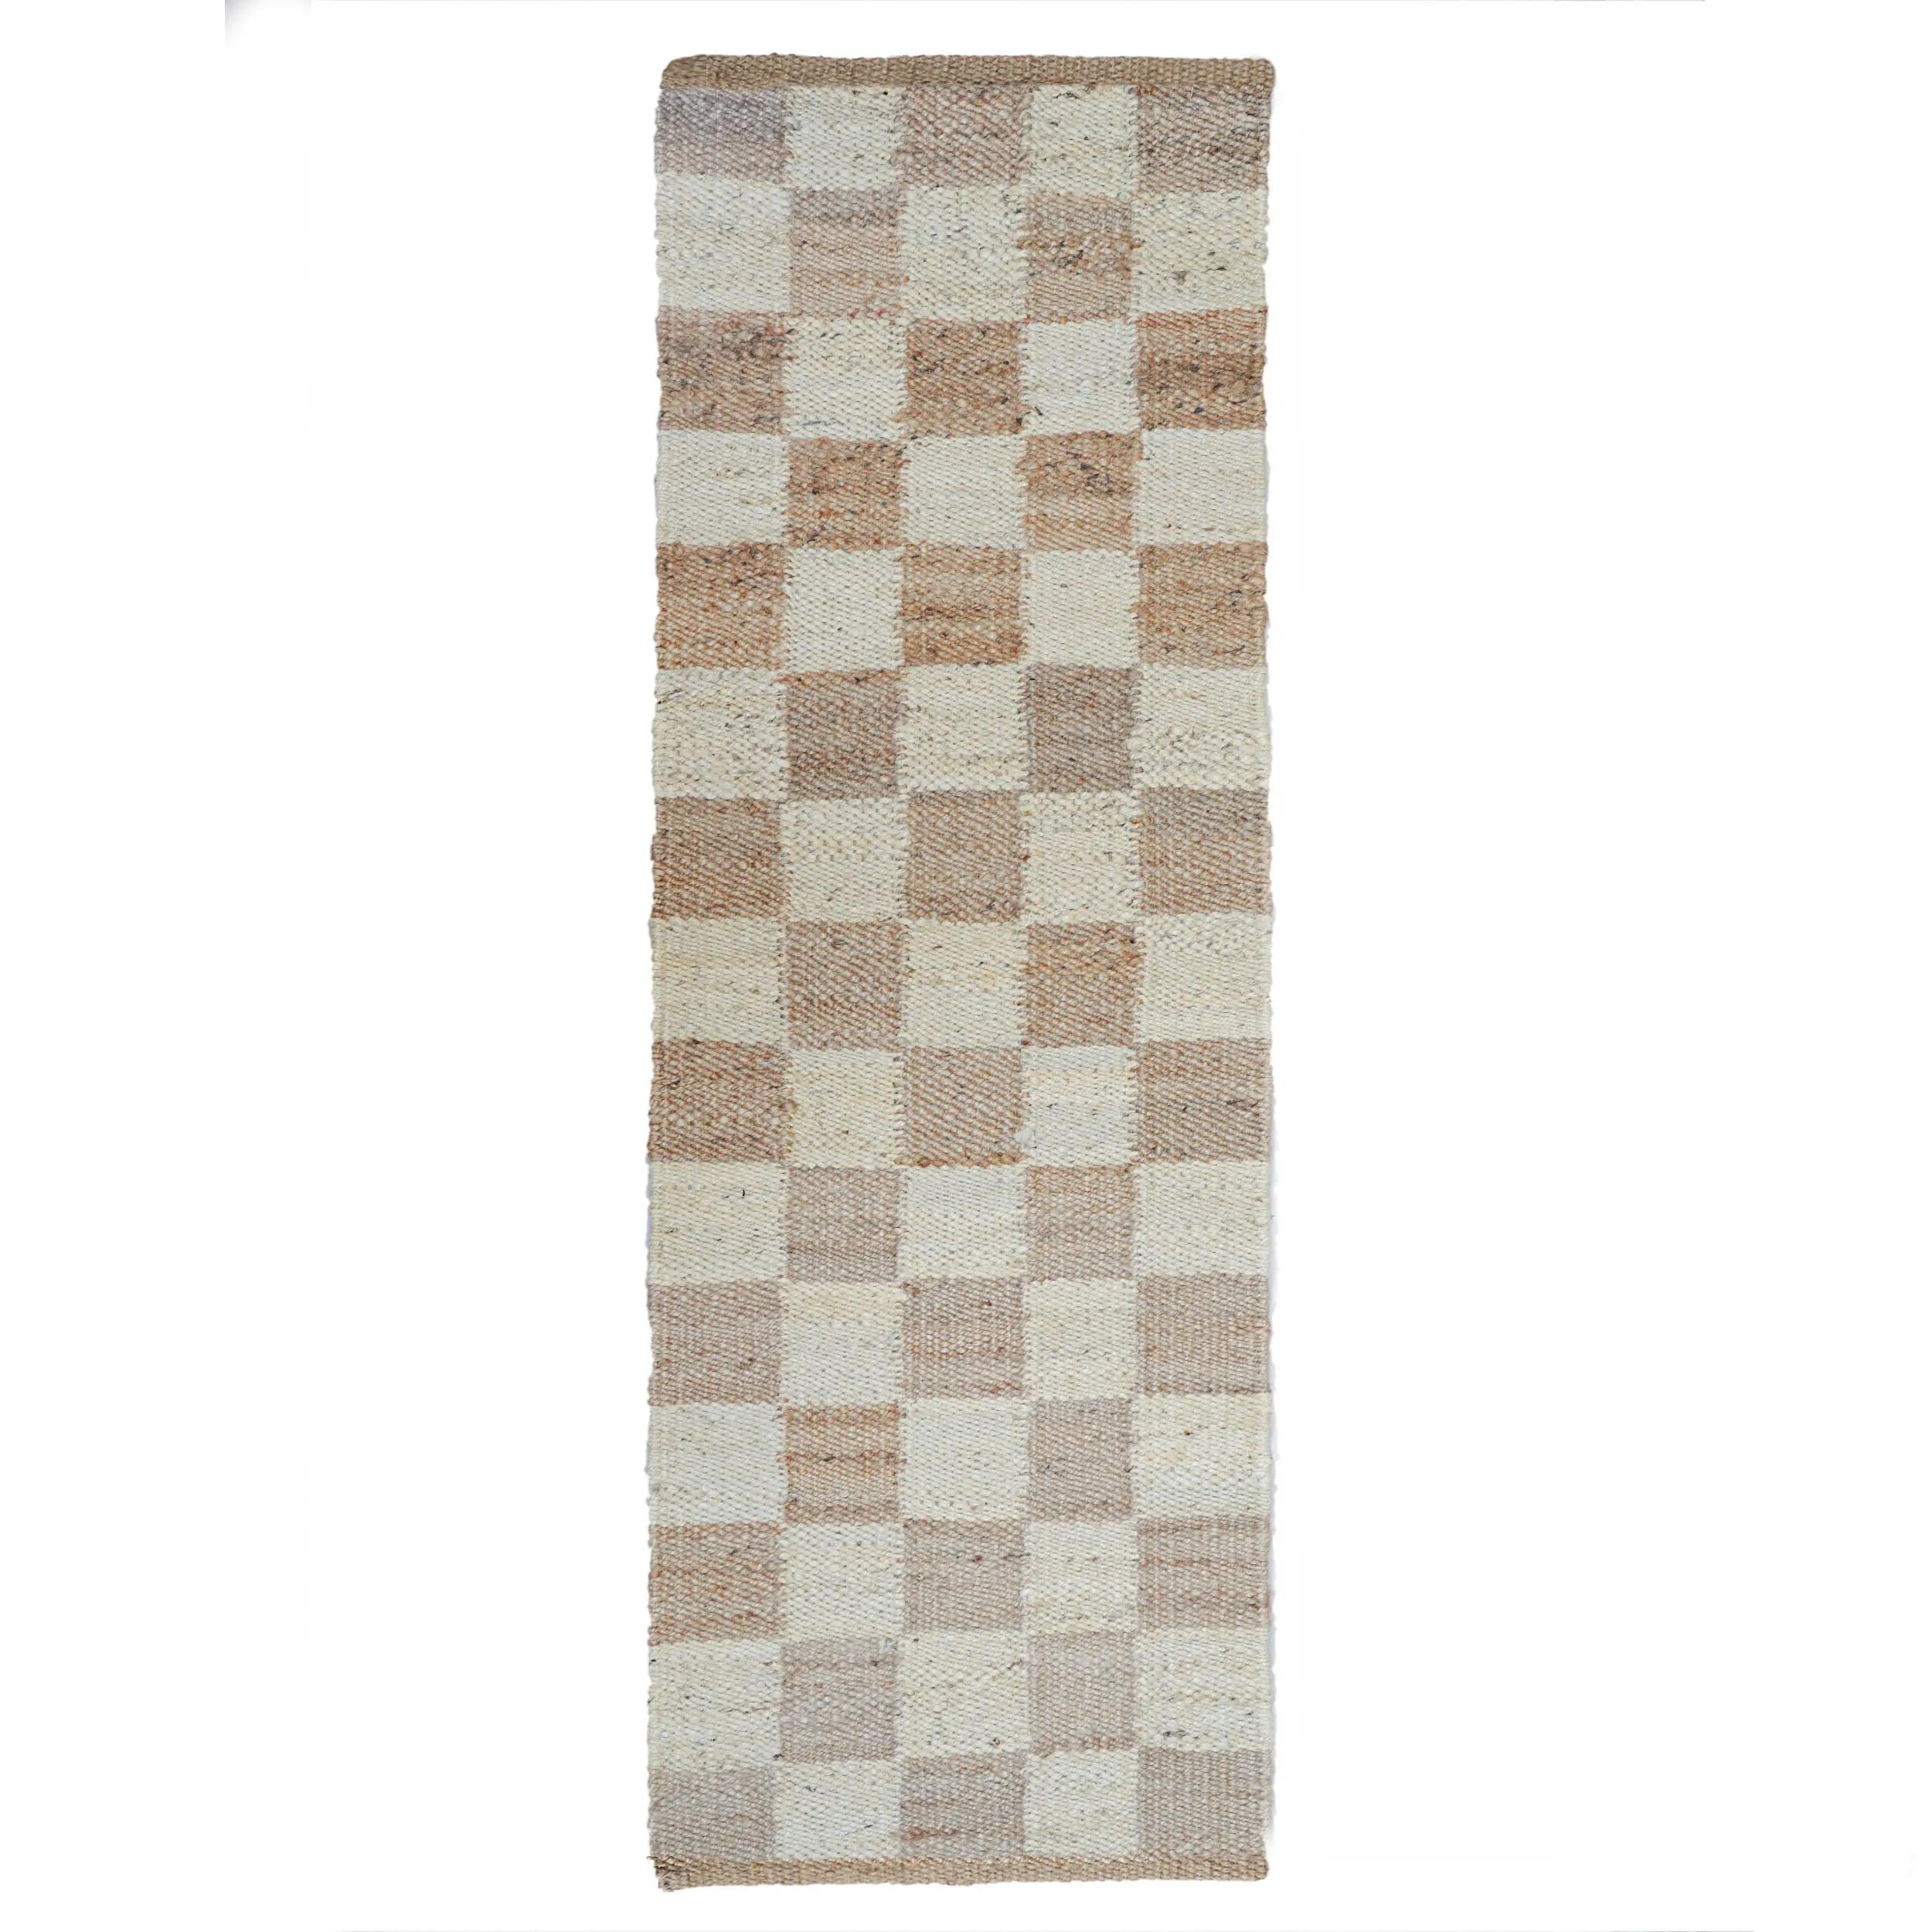 Checkered Handwoven Natural Jute Runner Rug with Off White Design